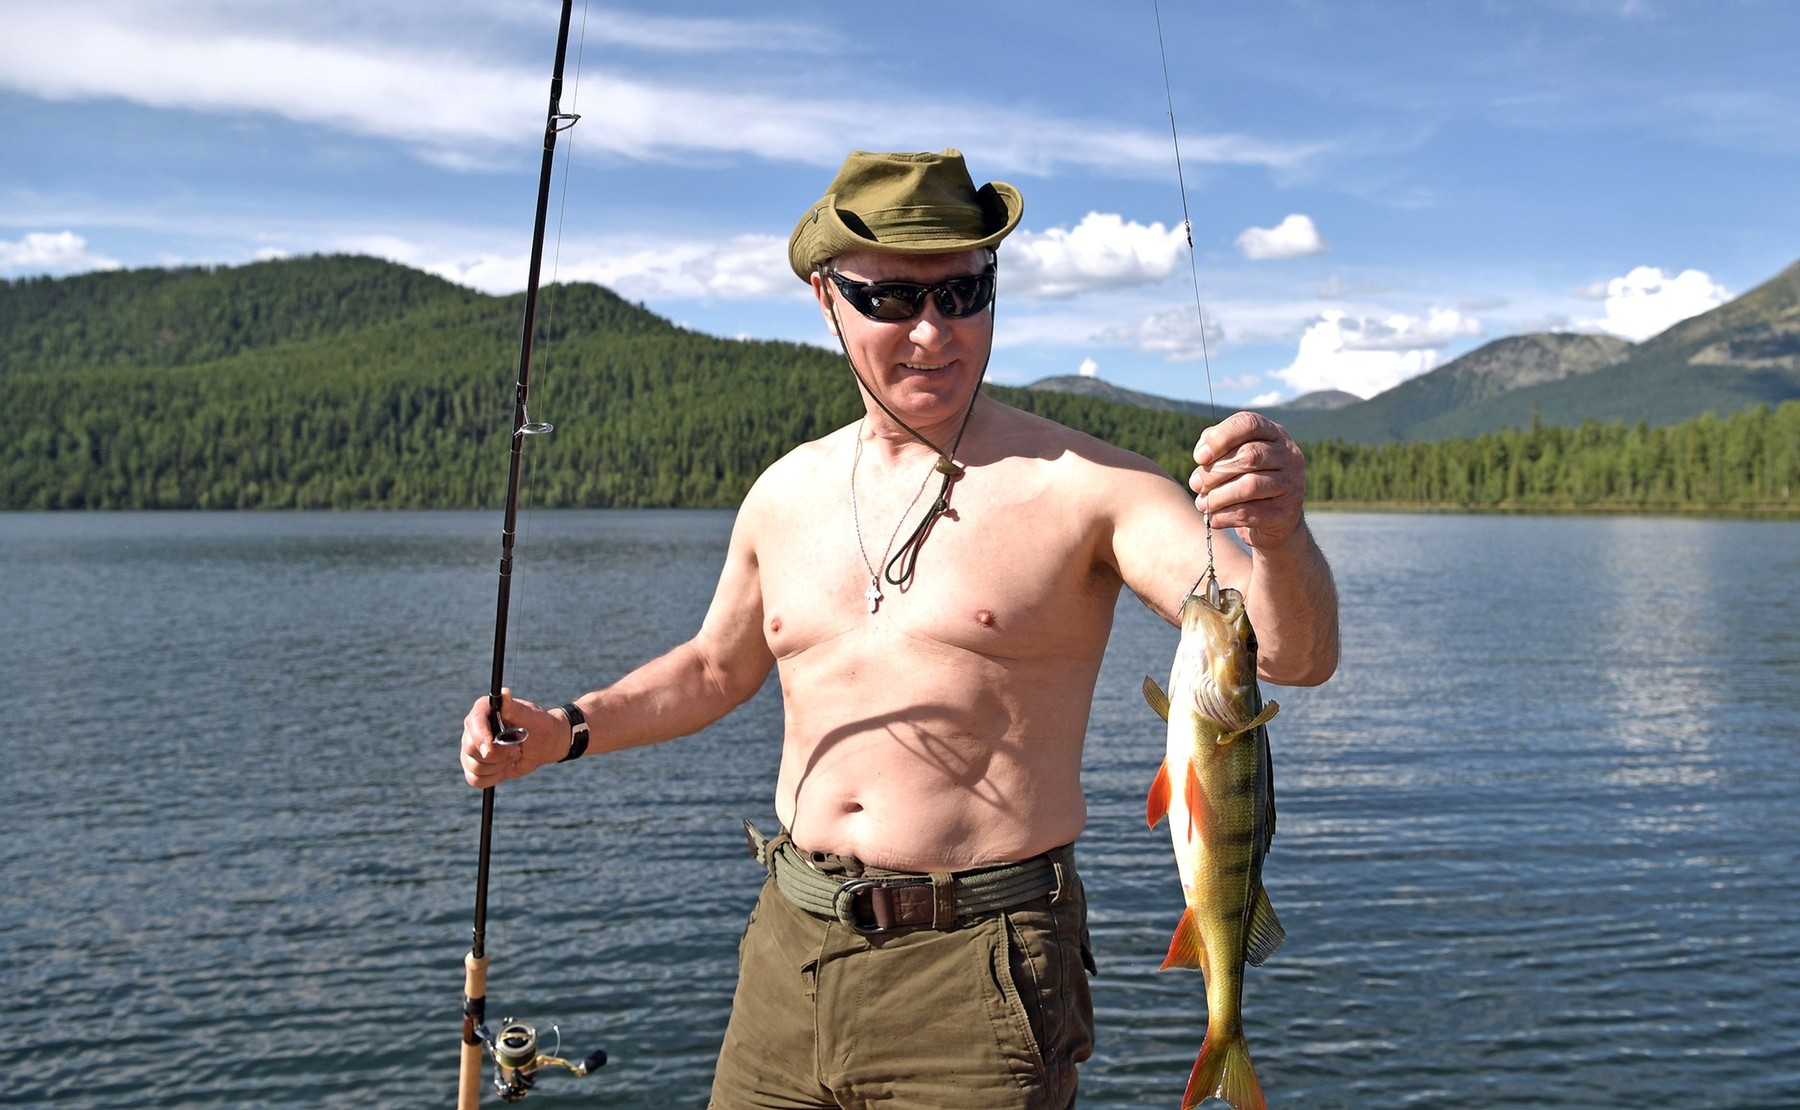 August 3, 2017 - Tyva, Tyva, Russia - Russian President Vladimir Putin holds a fish he caught fishing during a three-day fishing and hunting trip in the Siberian wilderness near the Mongolian border August 1-3, 2017 in the Tyva Republic, Russia.,Image: 344546402, License: Rights-managed, Restrictions: , Model Release: no, Credit line: Profimedia